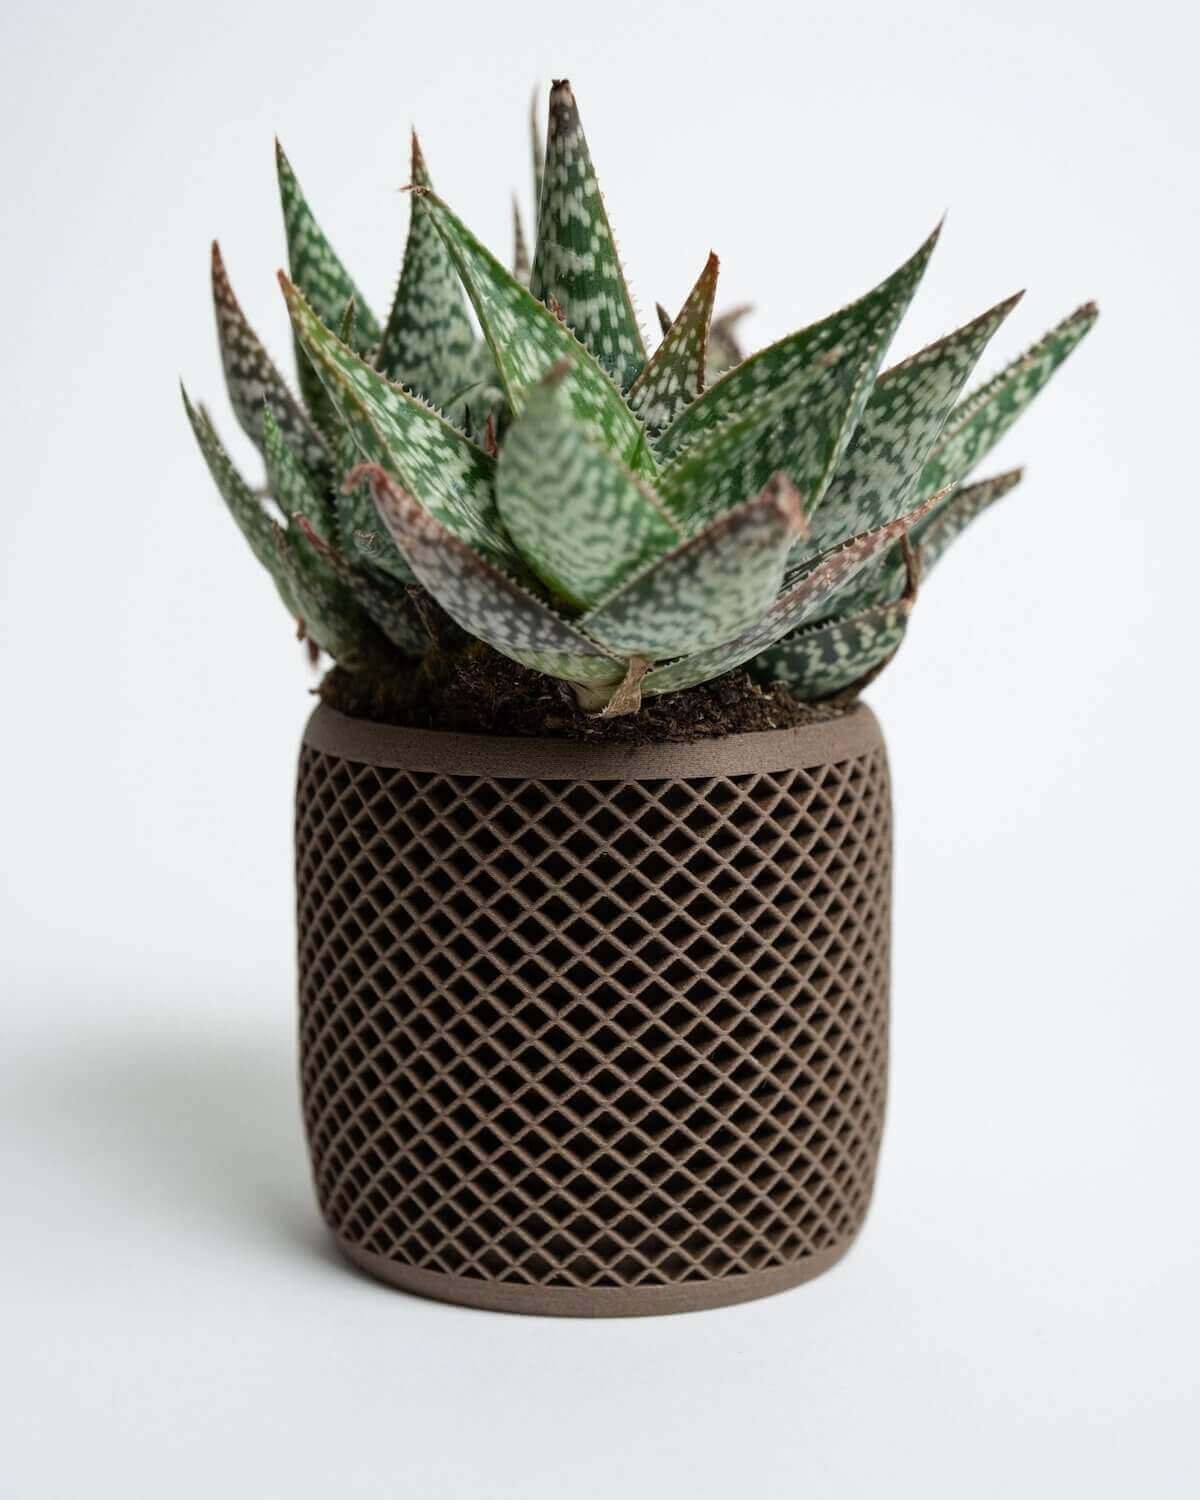 Modern planters | Unique Planters | Decor Planters from Woodland Pulse. Succulent pot with a green cactus inside.